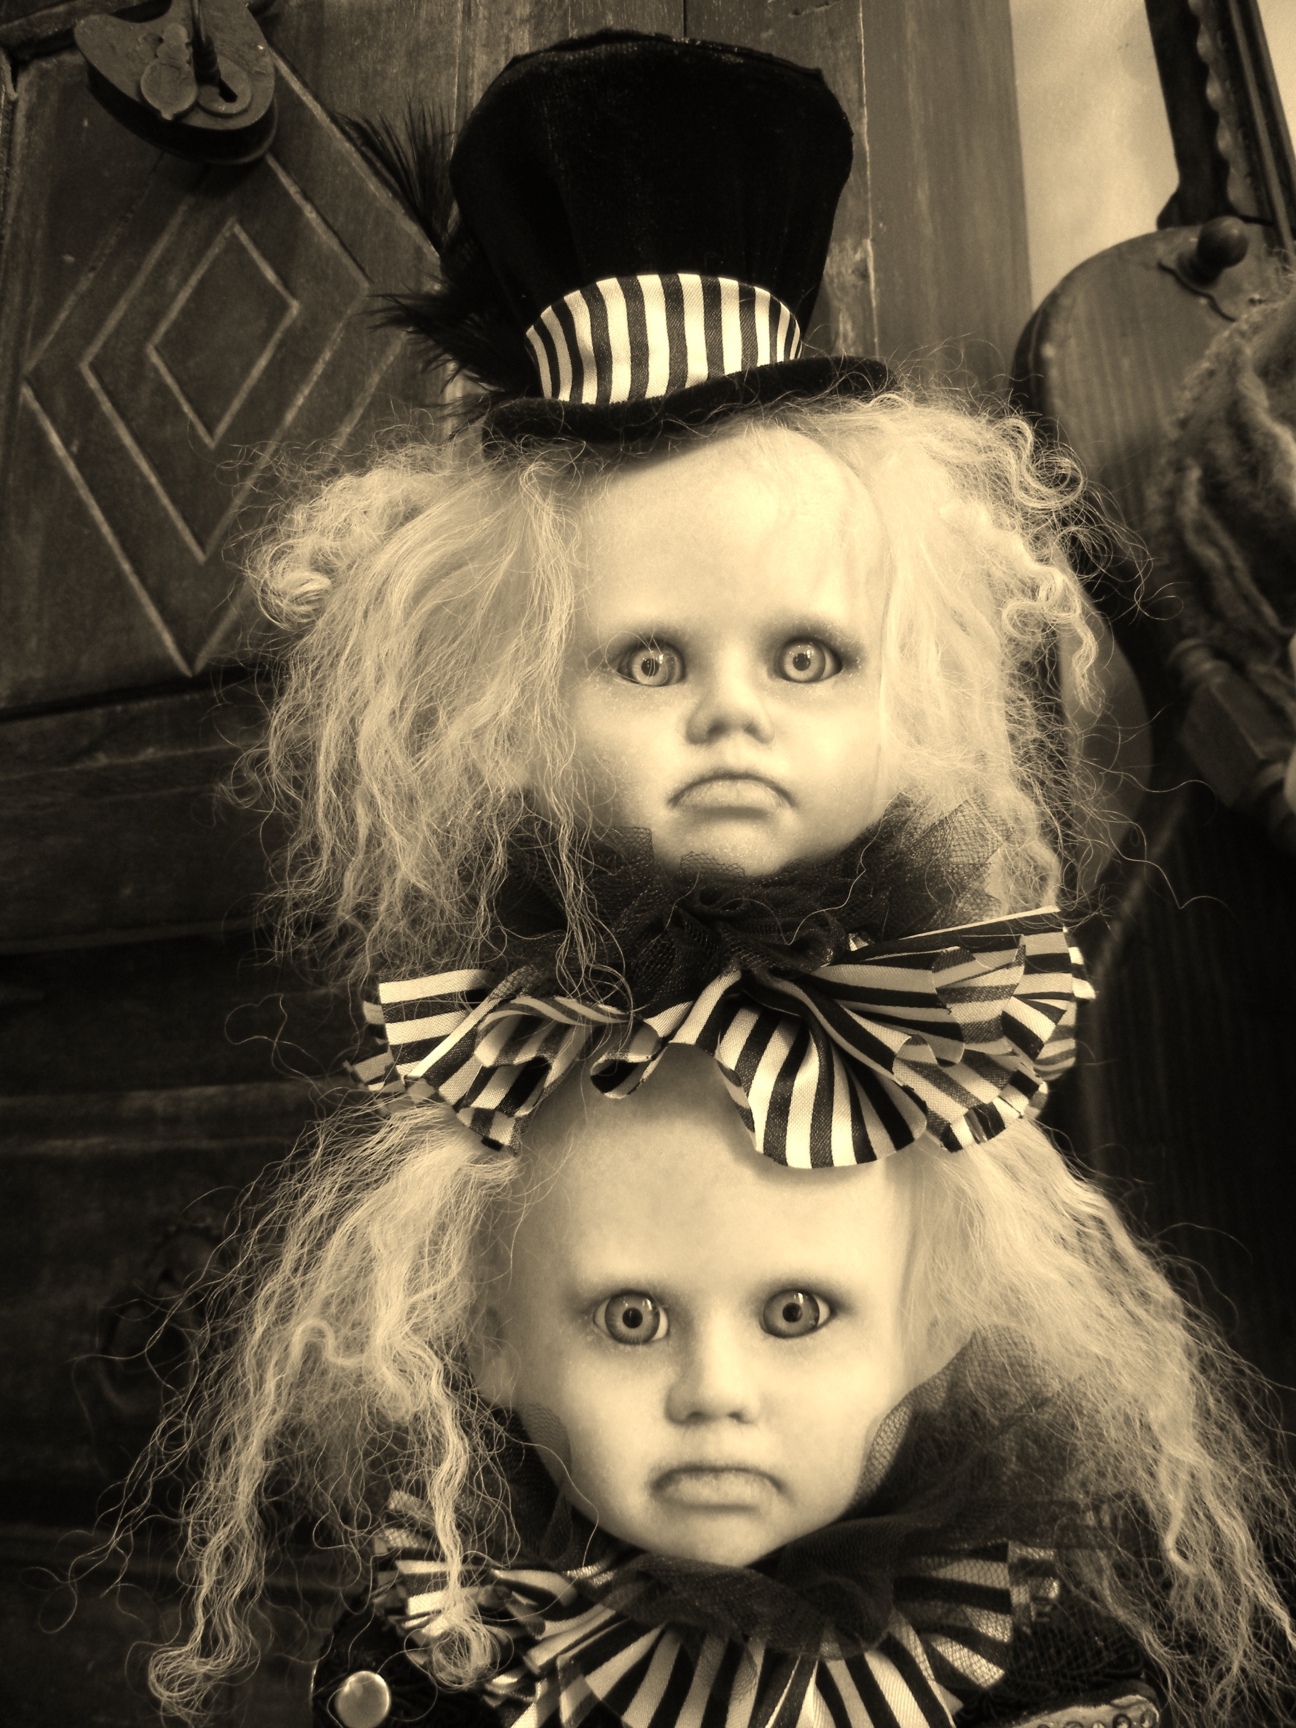 close-up of two goth doll repaints wearing black and white striped collars and a black tophat wild blond hair